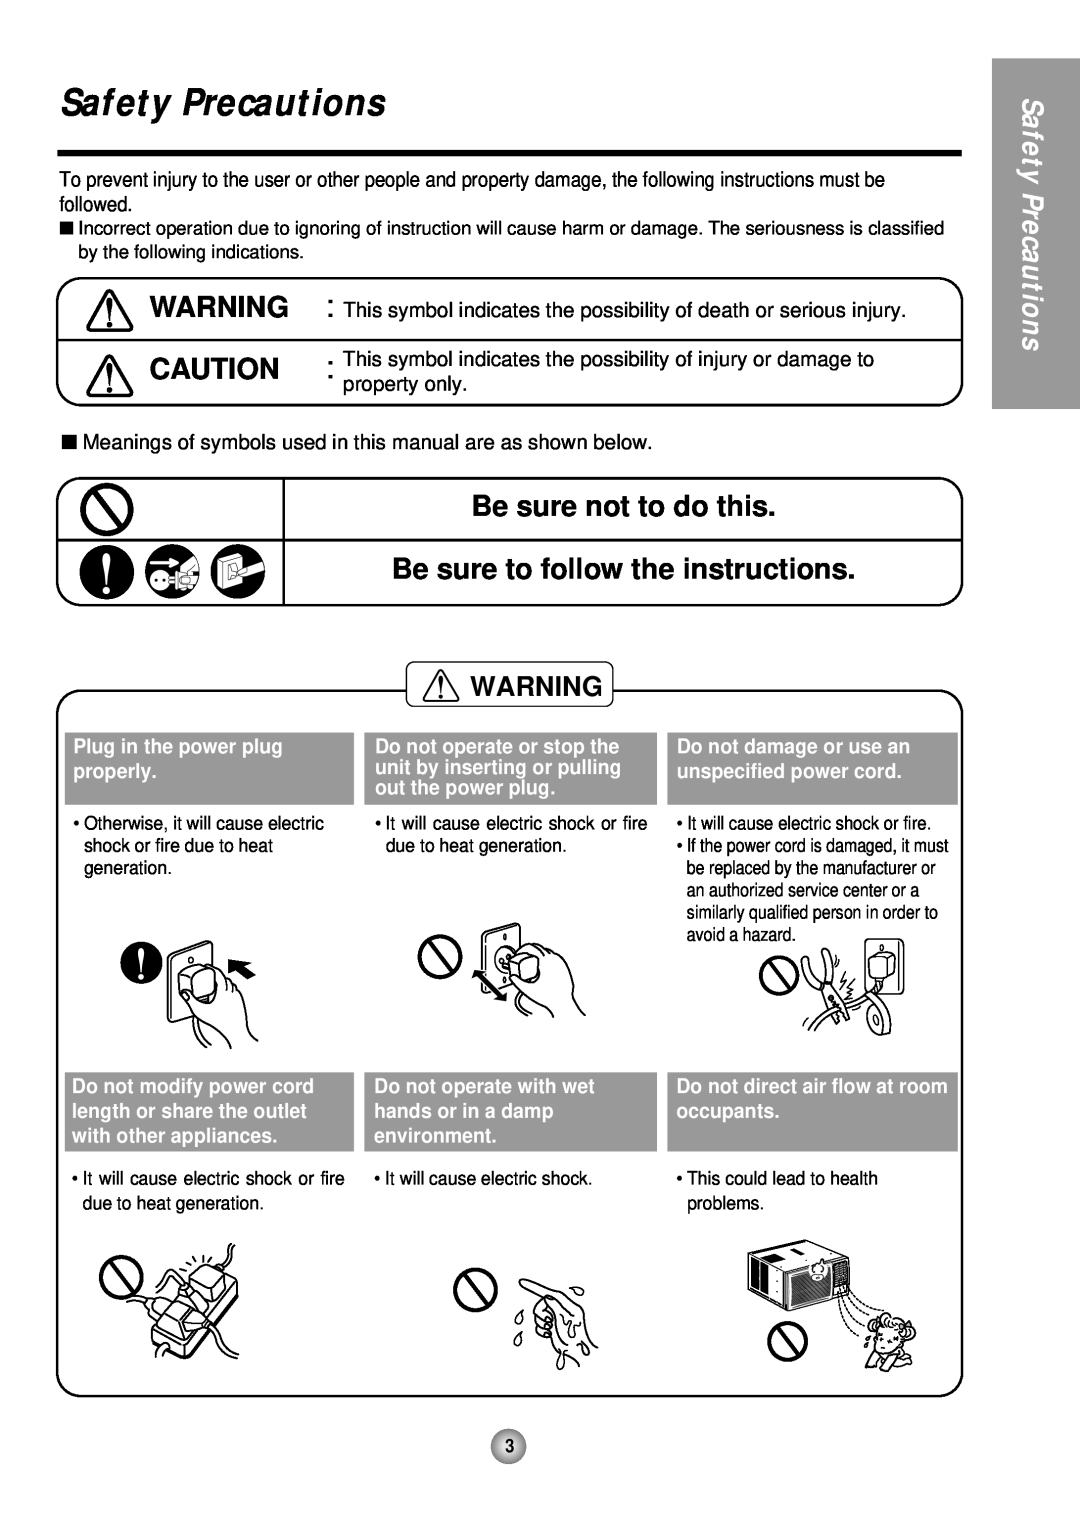 Panasonic CW-XC145HU Safety Precautions, Be sure not to do this, Be sure to follow the instructions, hands or in a damp 